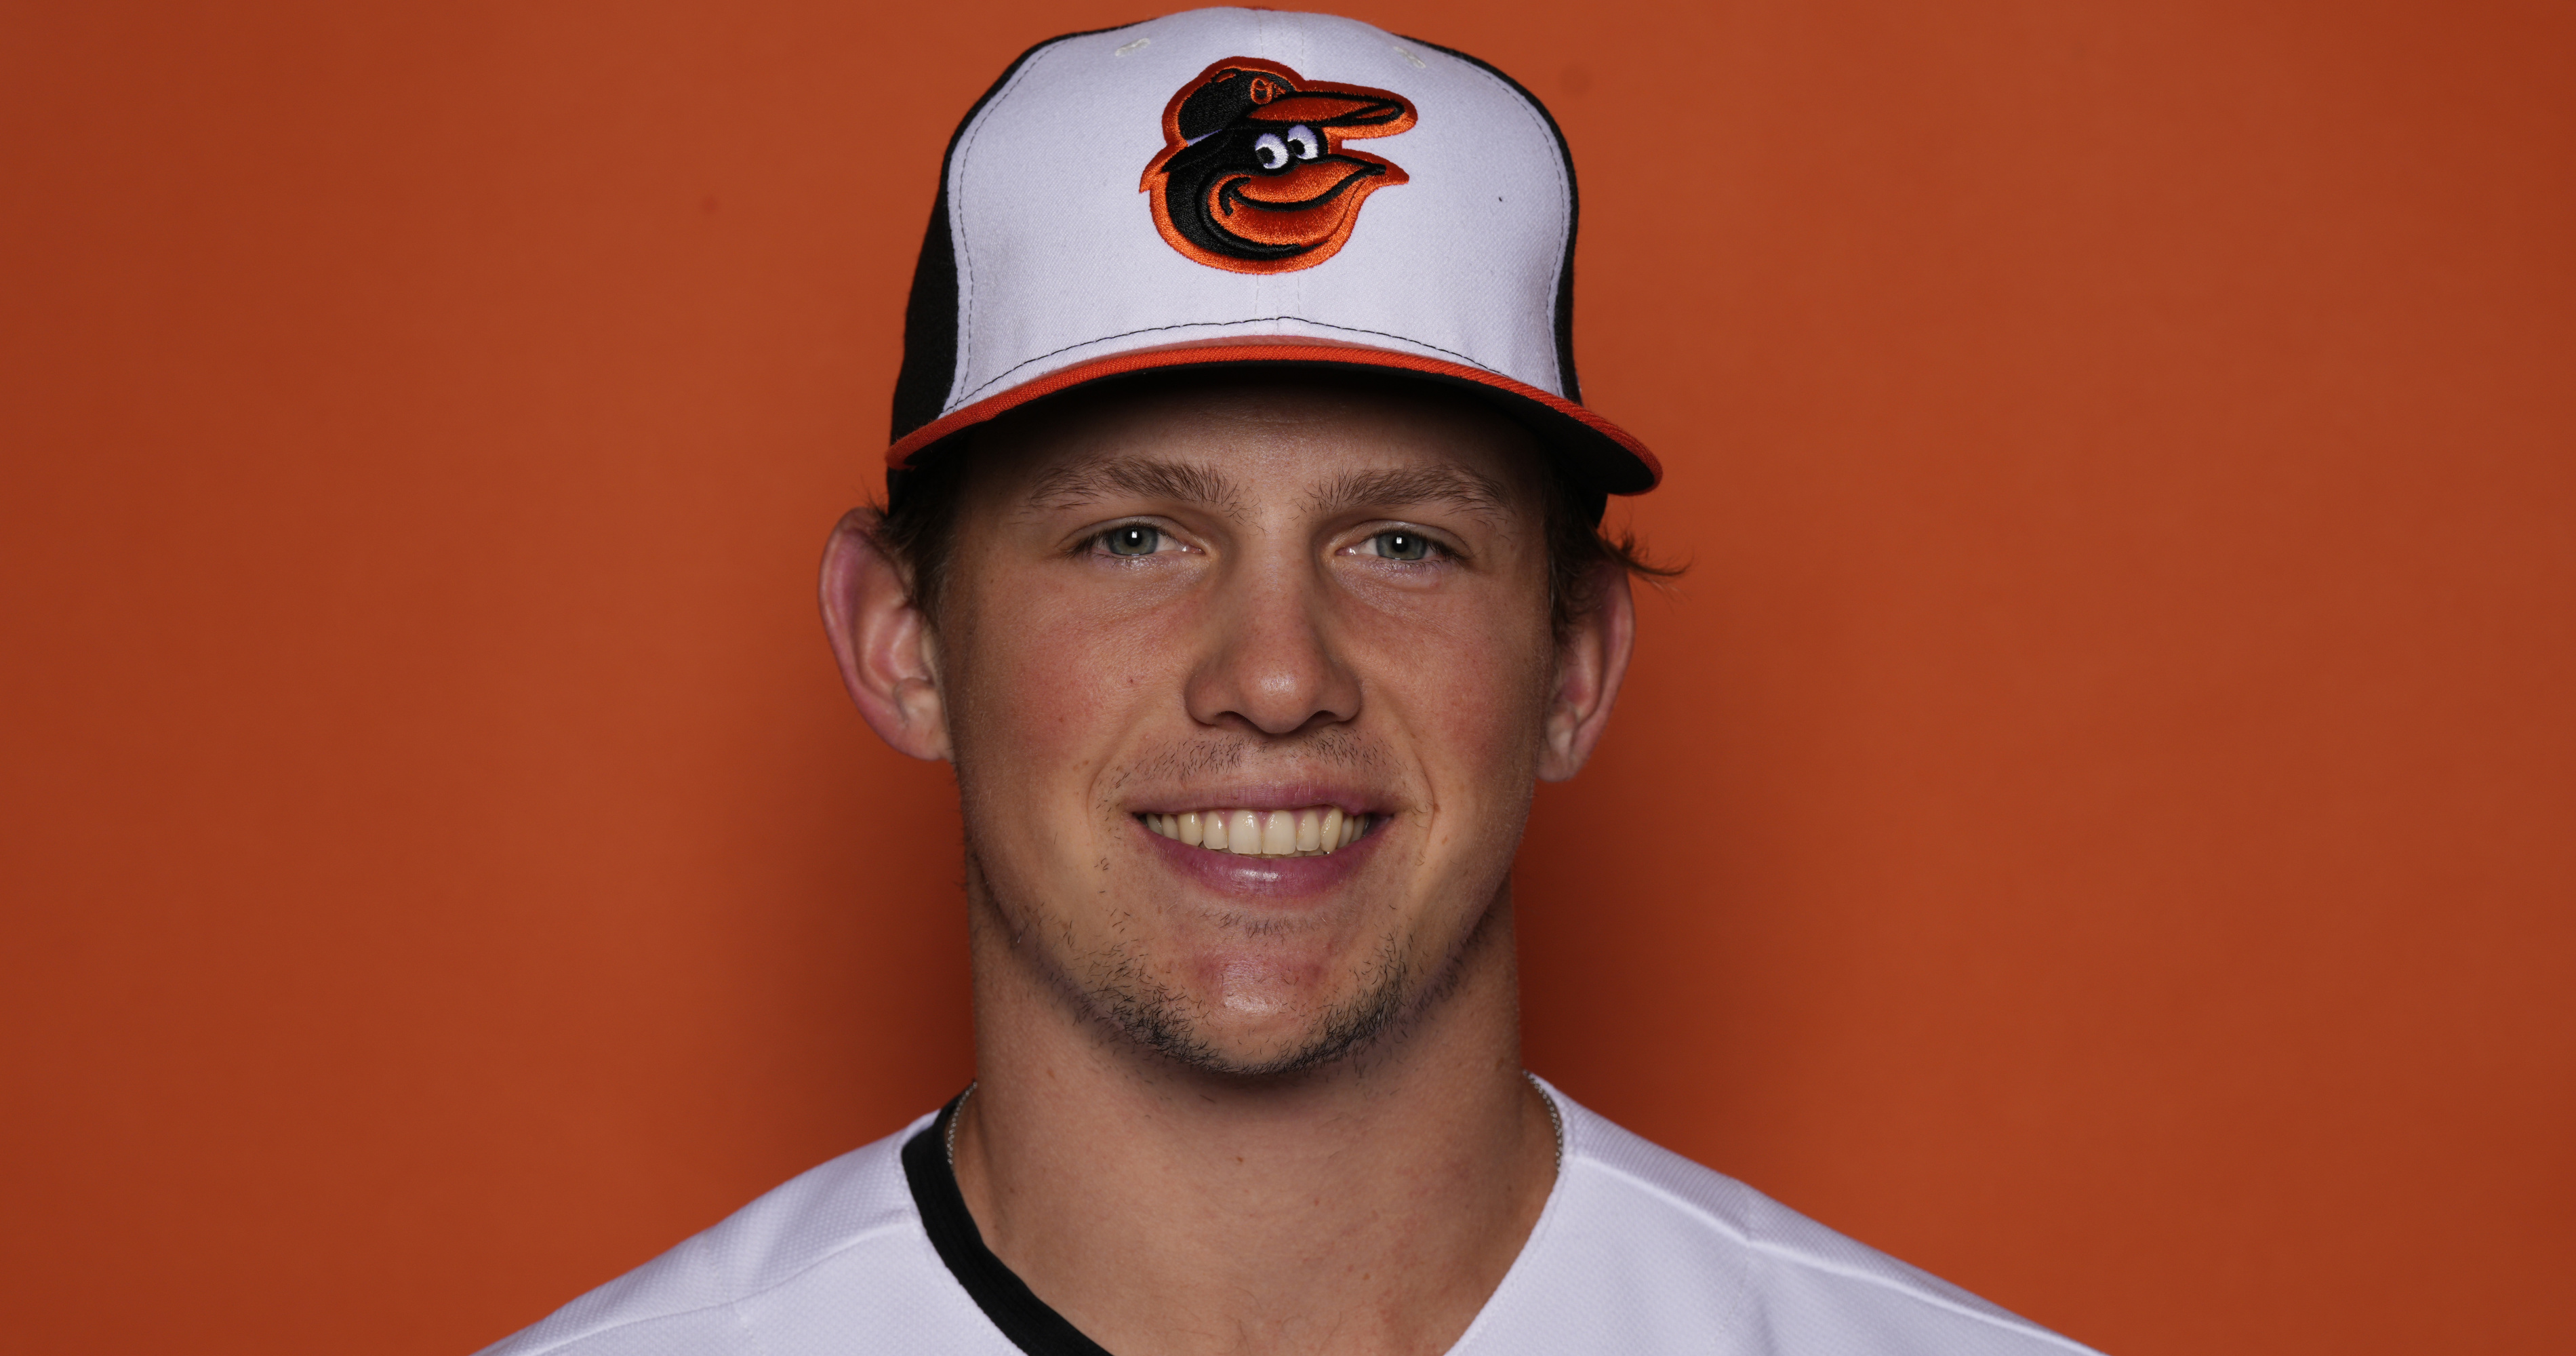 MLB's No. 1 Prospect Adley Rutschman Called Up by Orioles, Will Debut